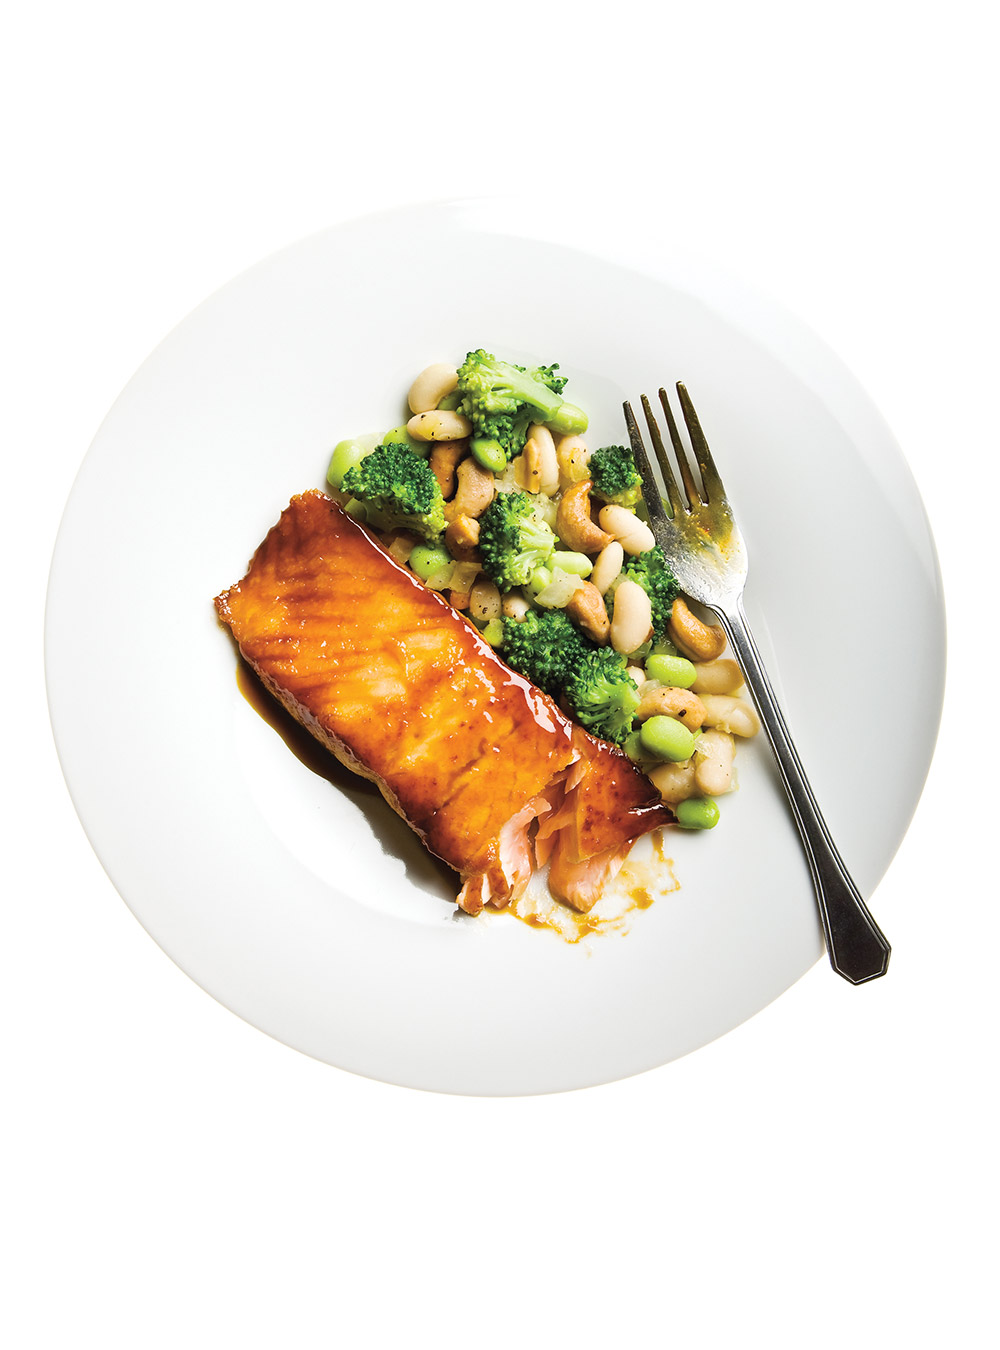 Glazed Salmon with a Warm White Bean, Soybean and Broccoli Salad